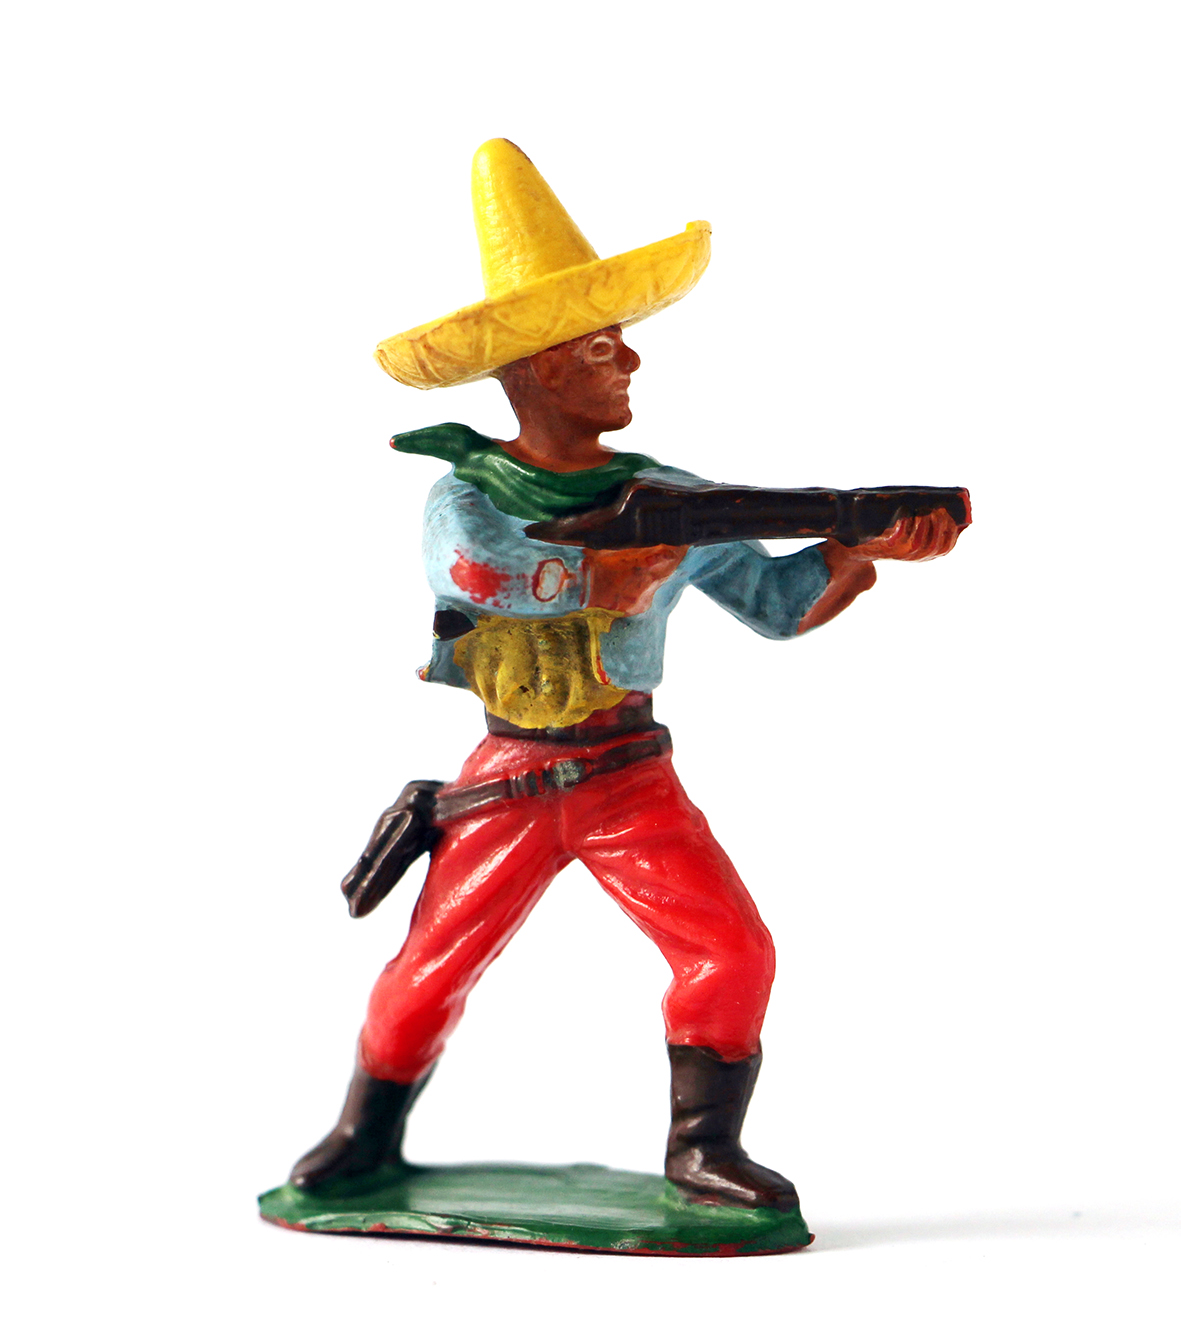 Ancienne figurine Starlux Mexicain